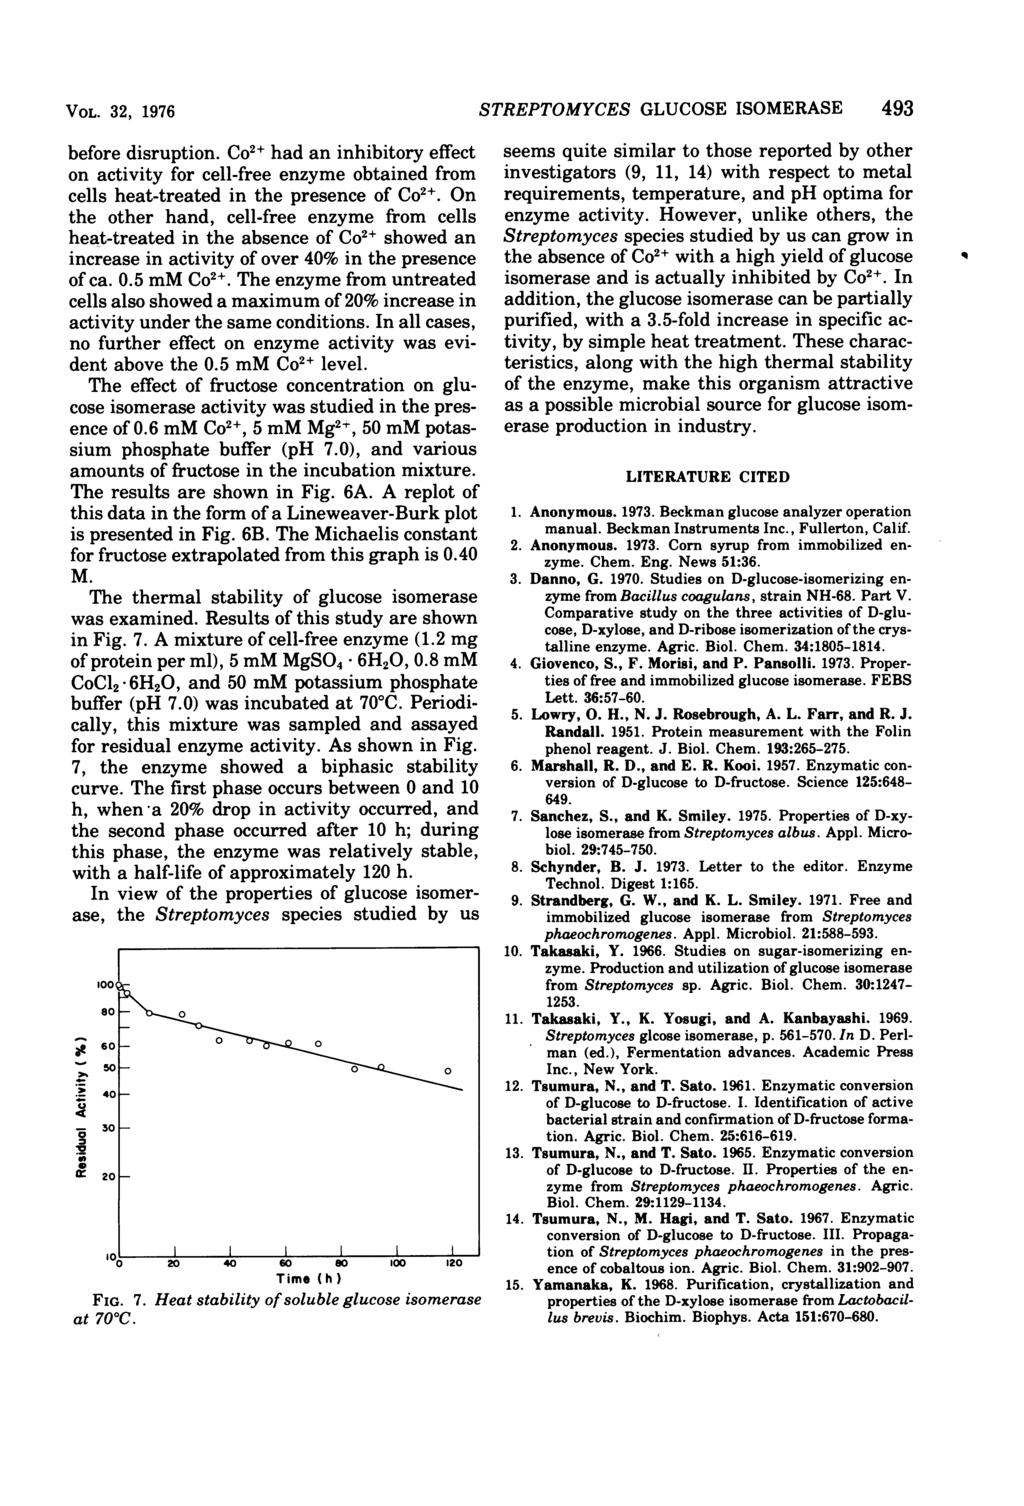 VOL. 32, 1976 before disruption. Co2` had an inhibitory effect on activity for cell-free enzyme obtained from cells heat-treated in the presence of Co2+.